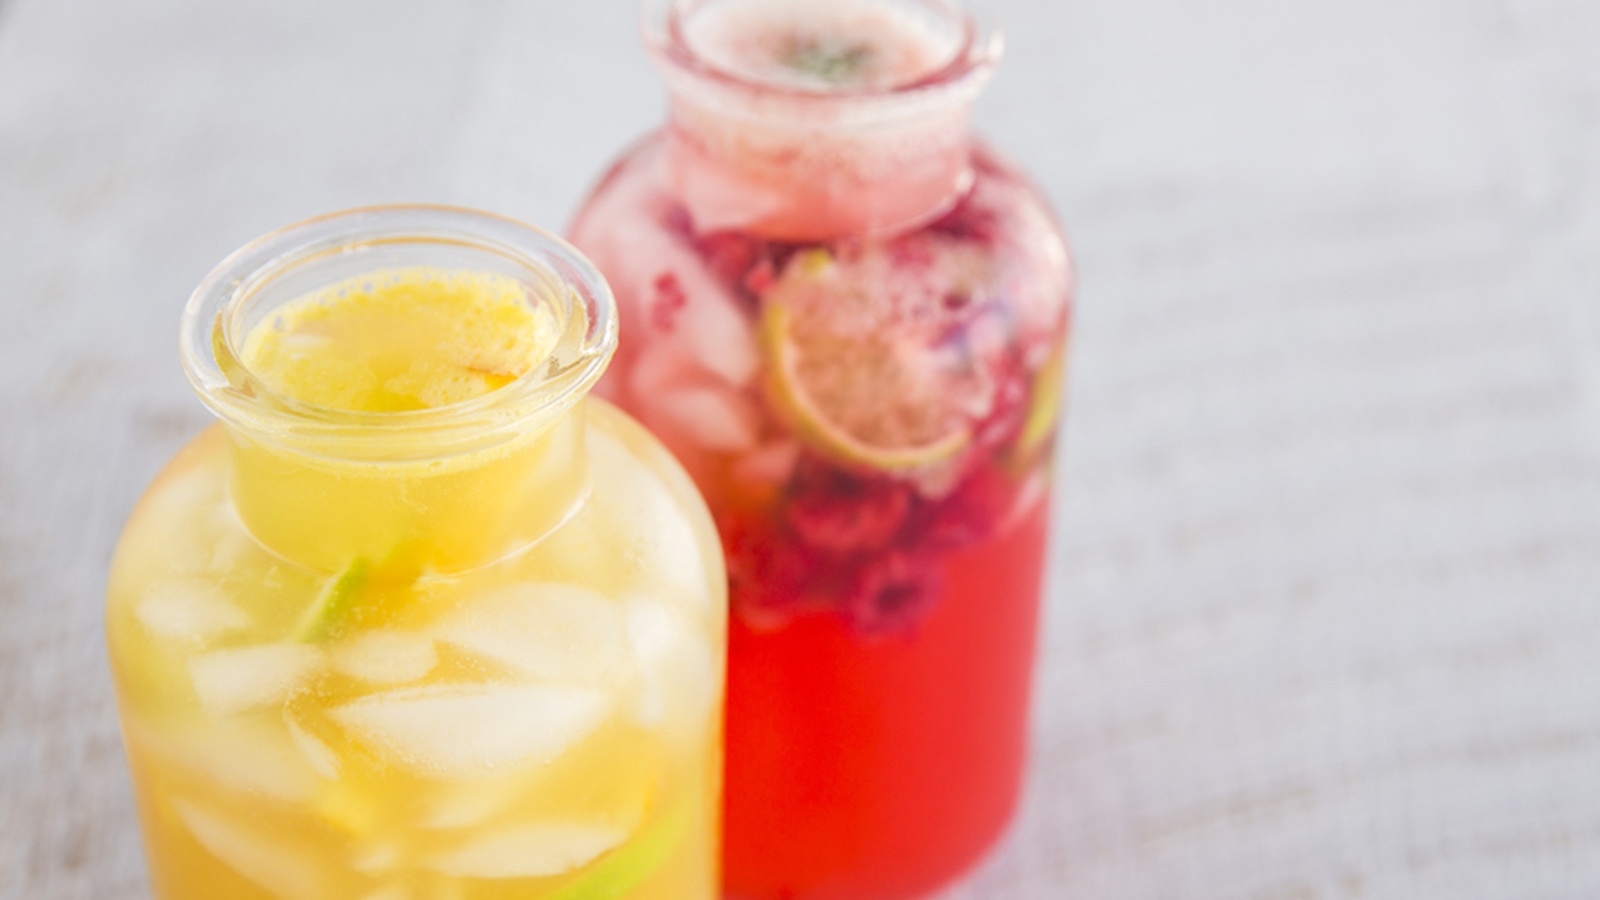 Substitute Alcohol This Summer With These Refreshing Recipes